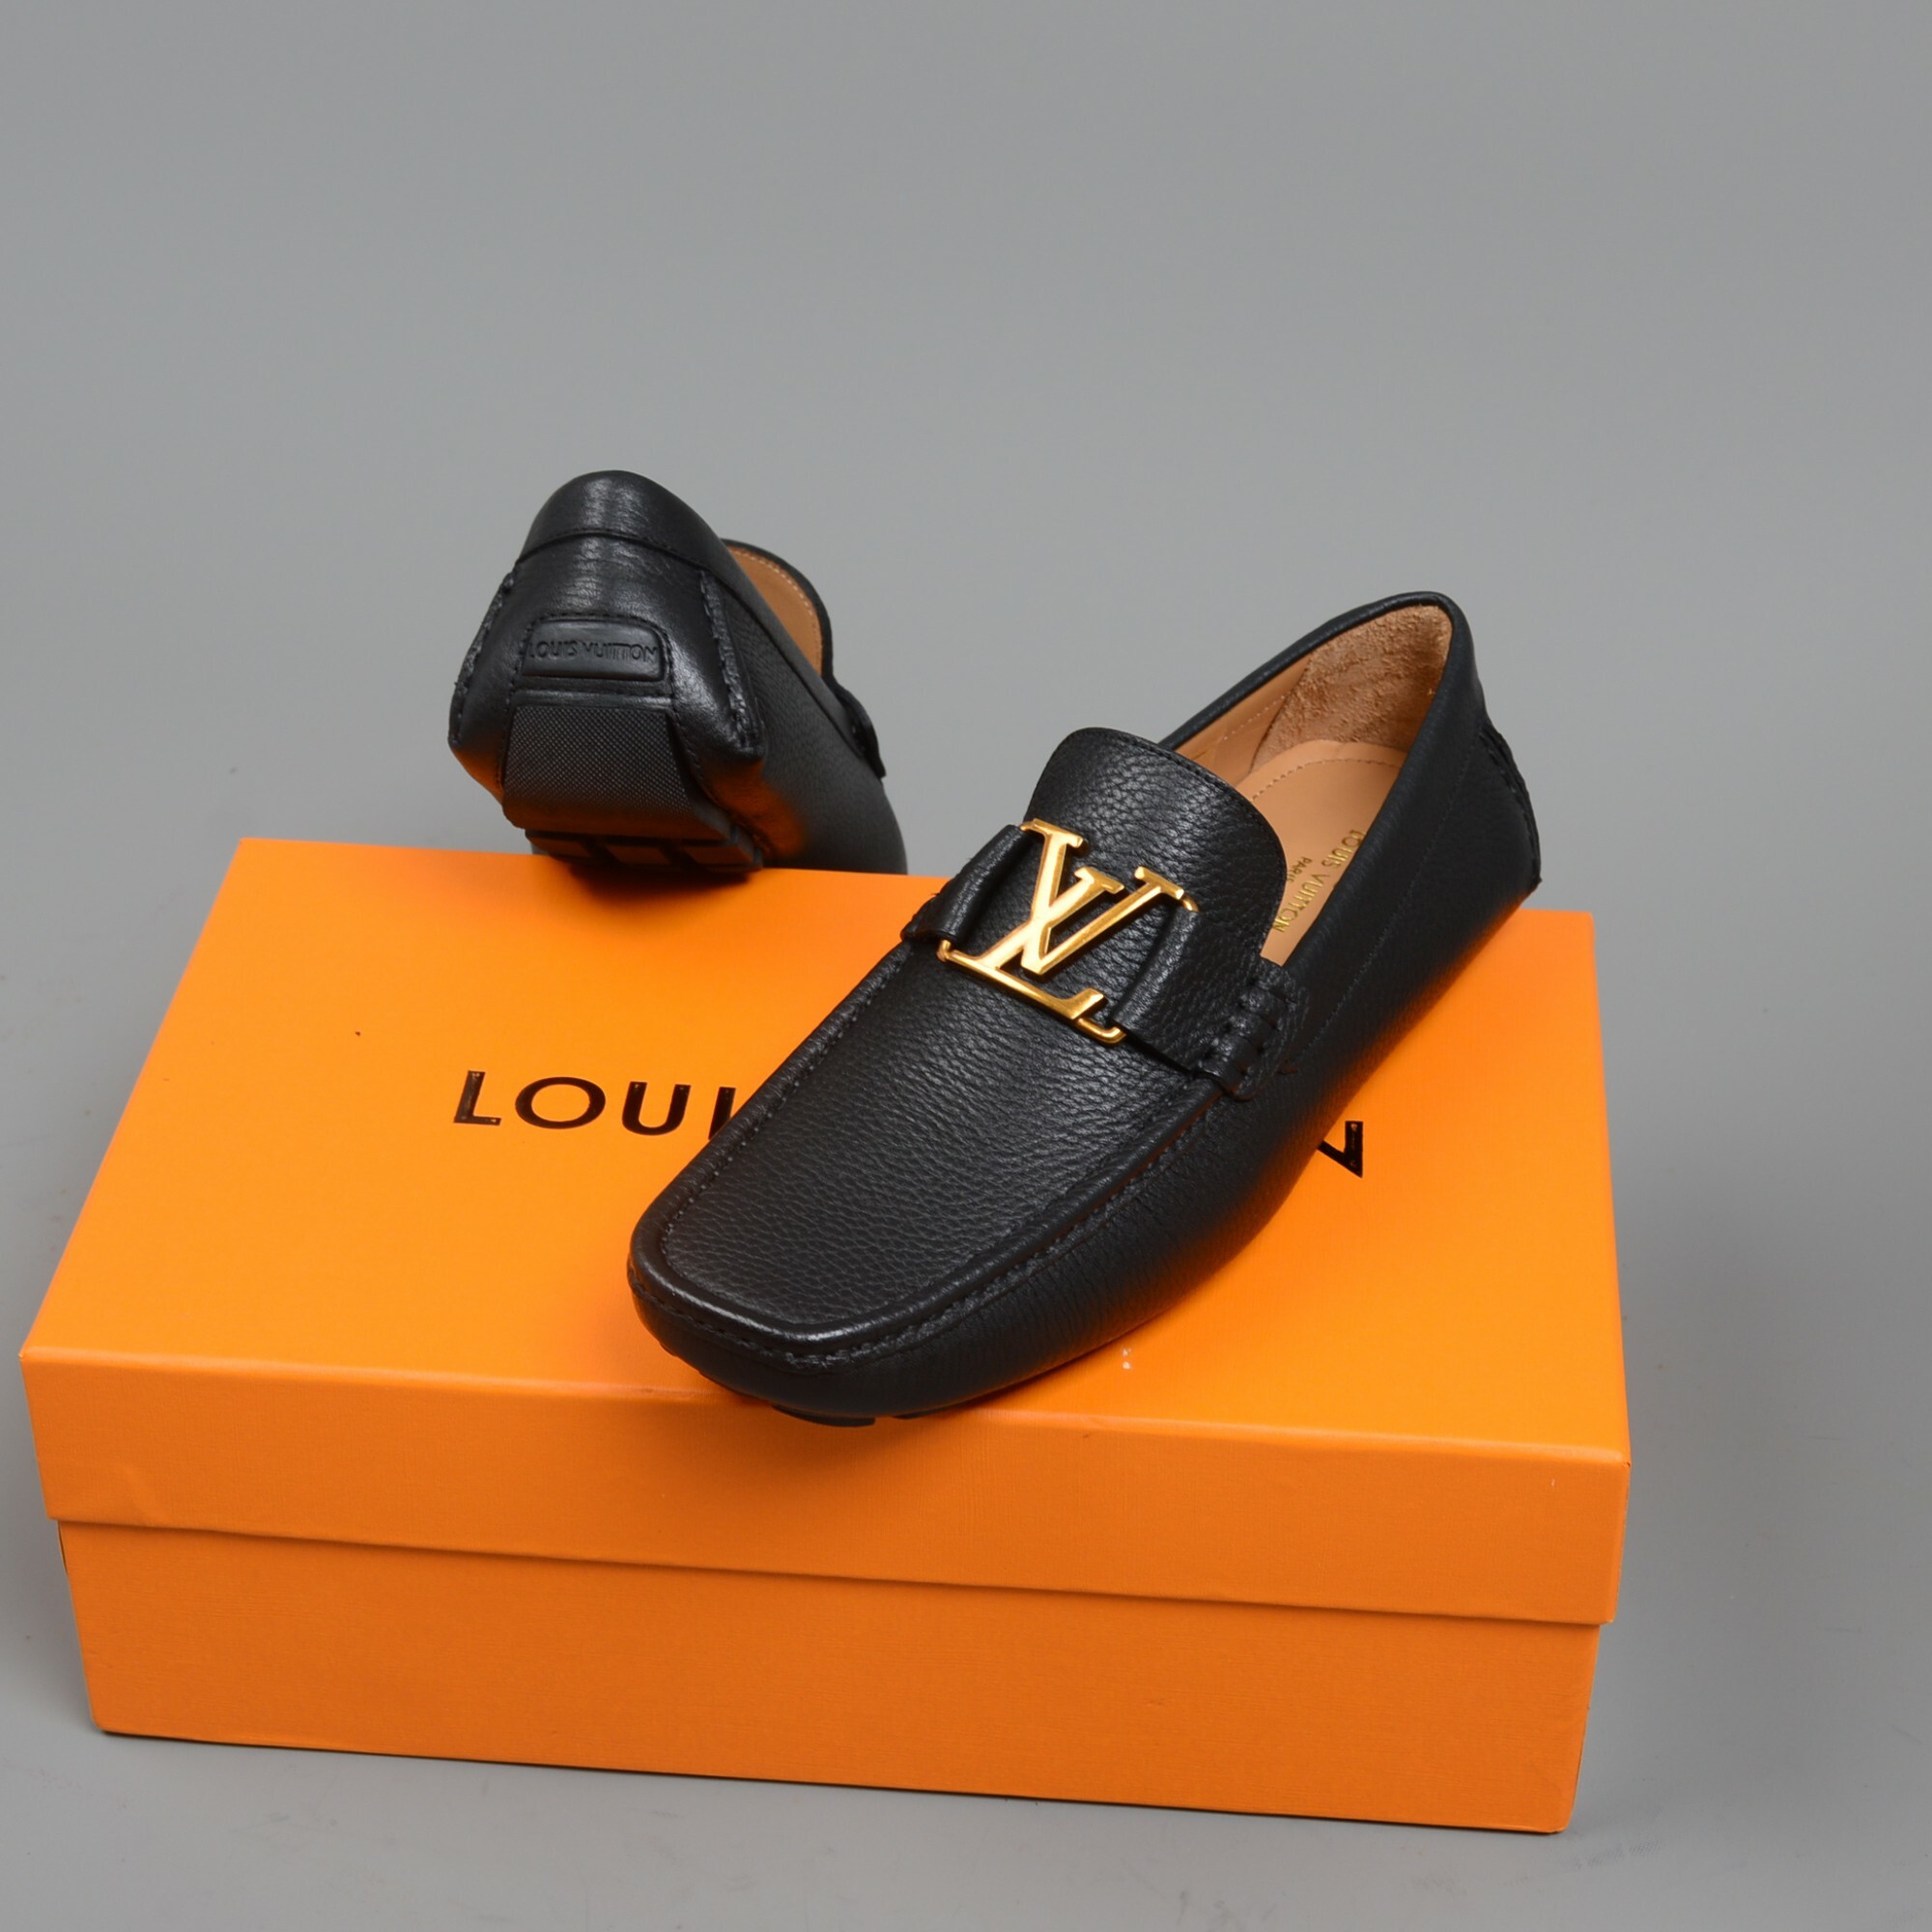 Louis Vuitton Off White Leather Monte Carlo Loafers Size 39 Louis